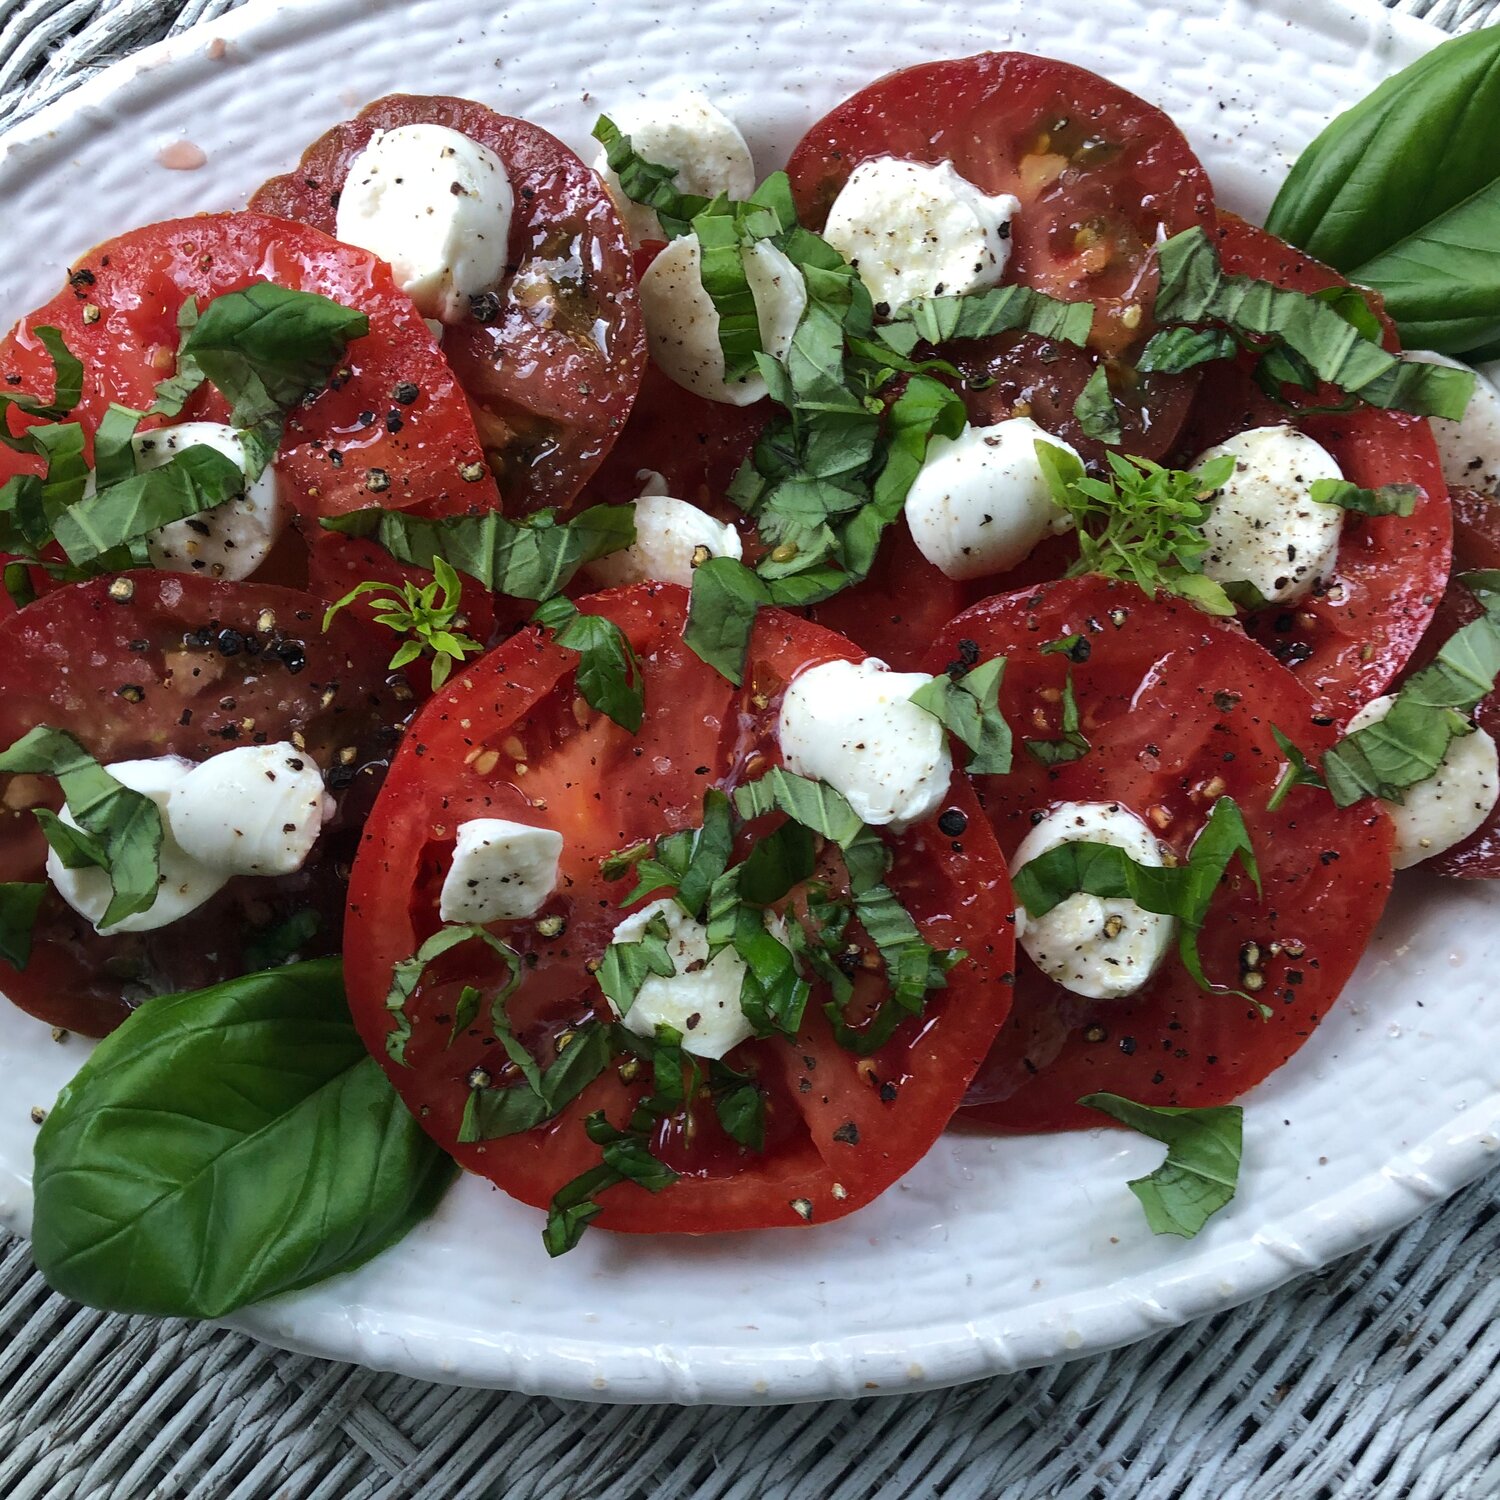 Tomato Caprese Salad is best made when fresh basil and vine-ripened tomatoes are in their prime.